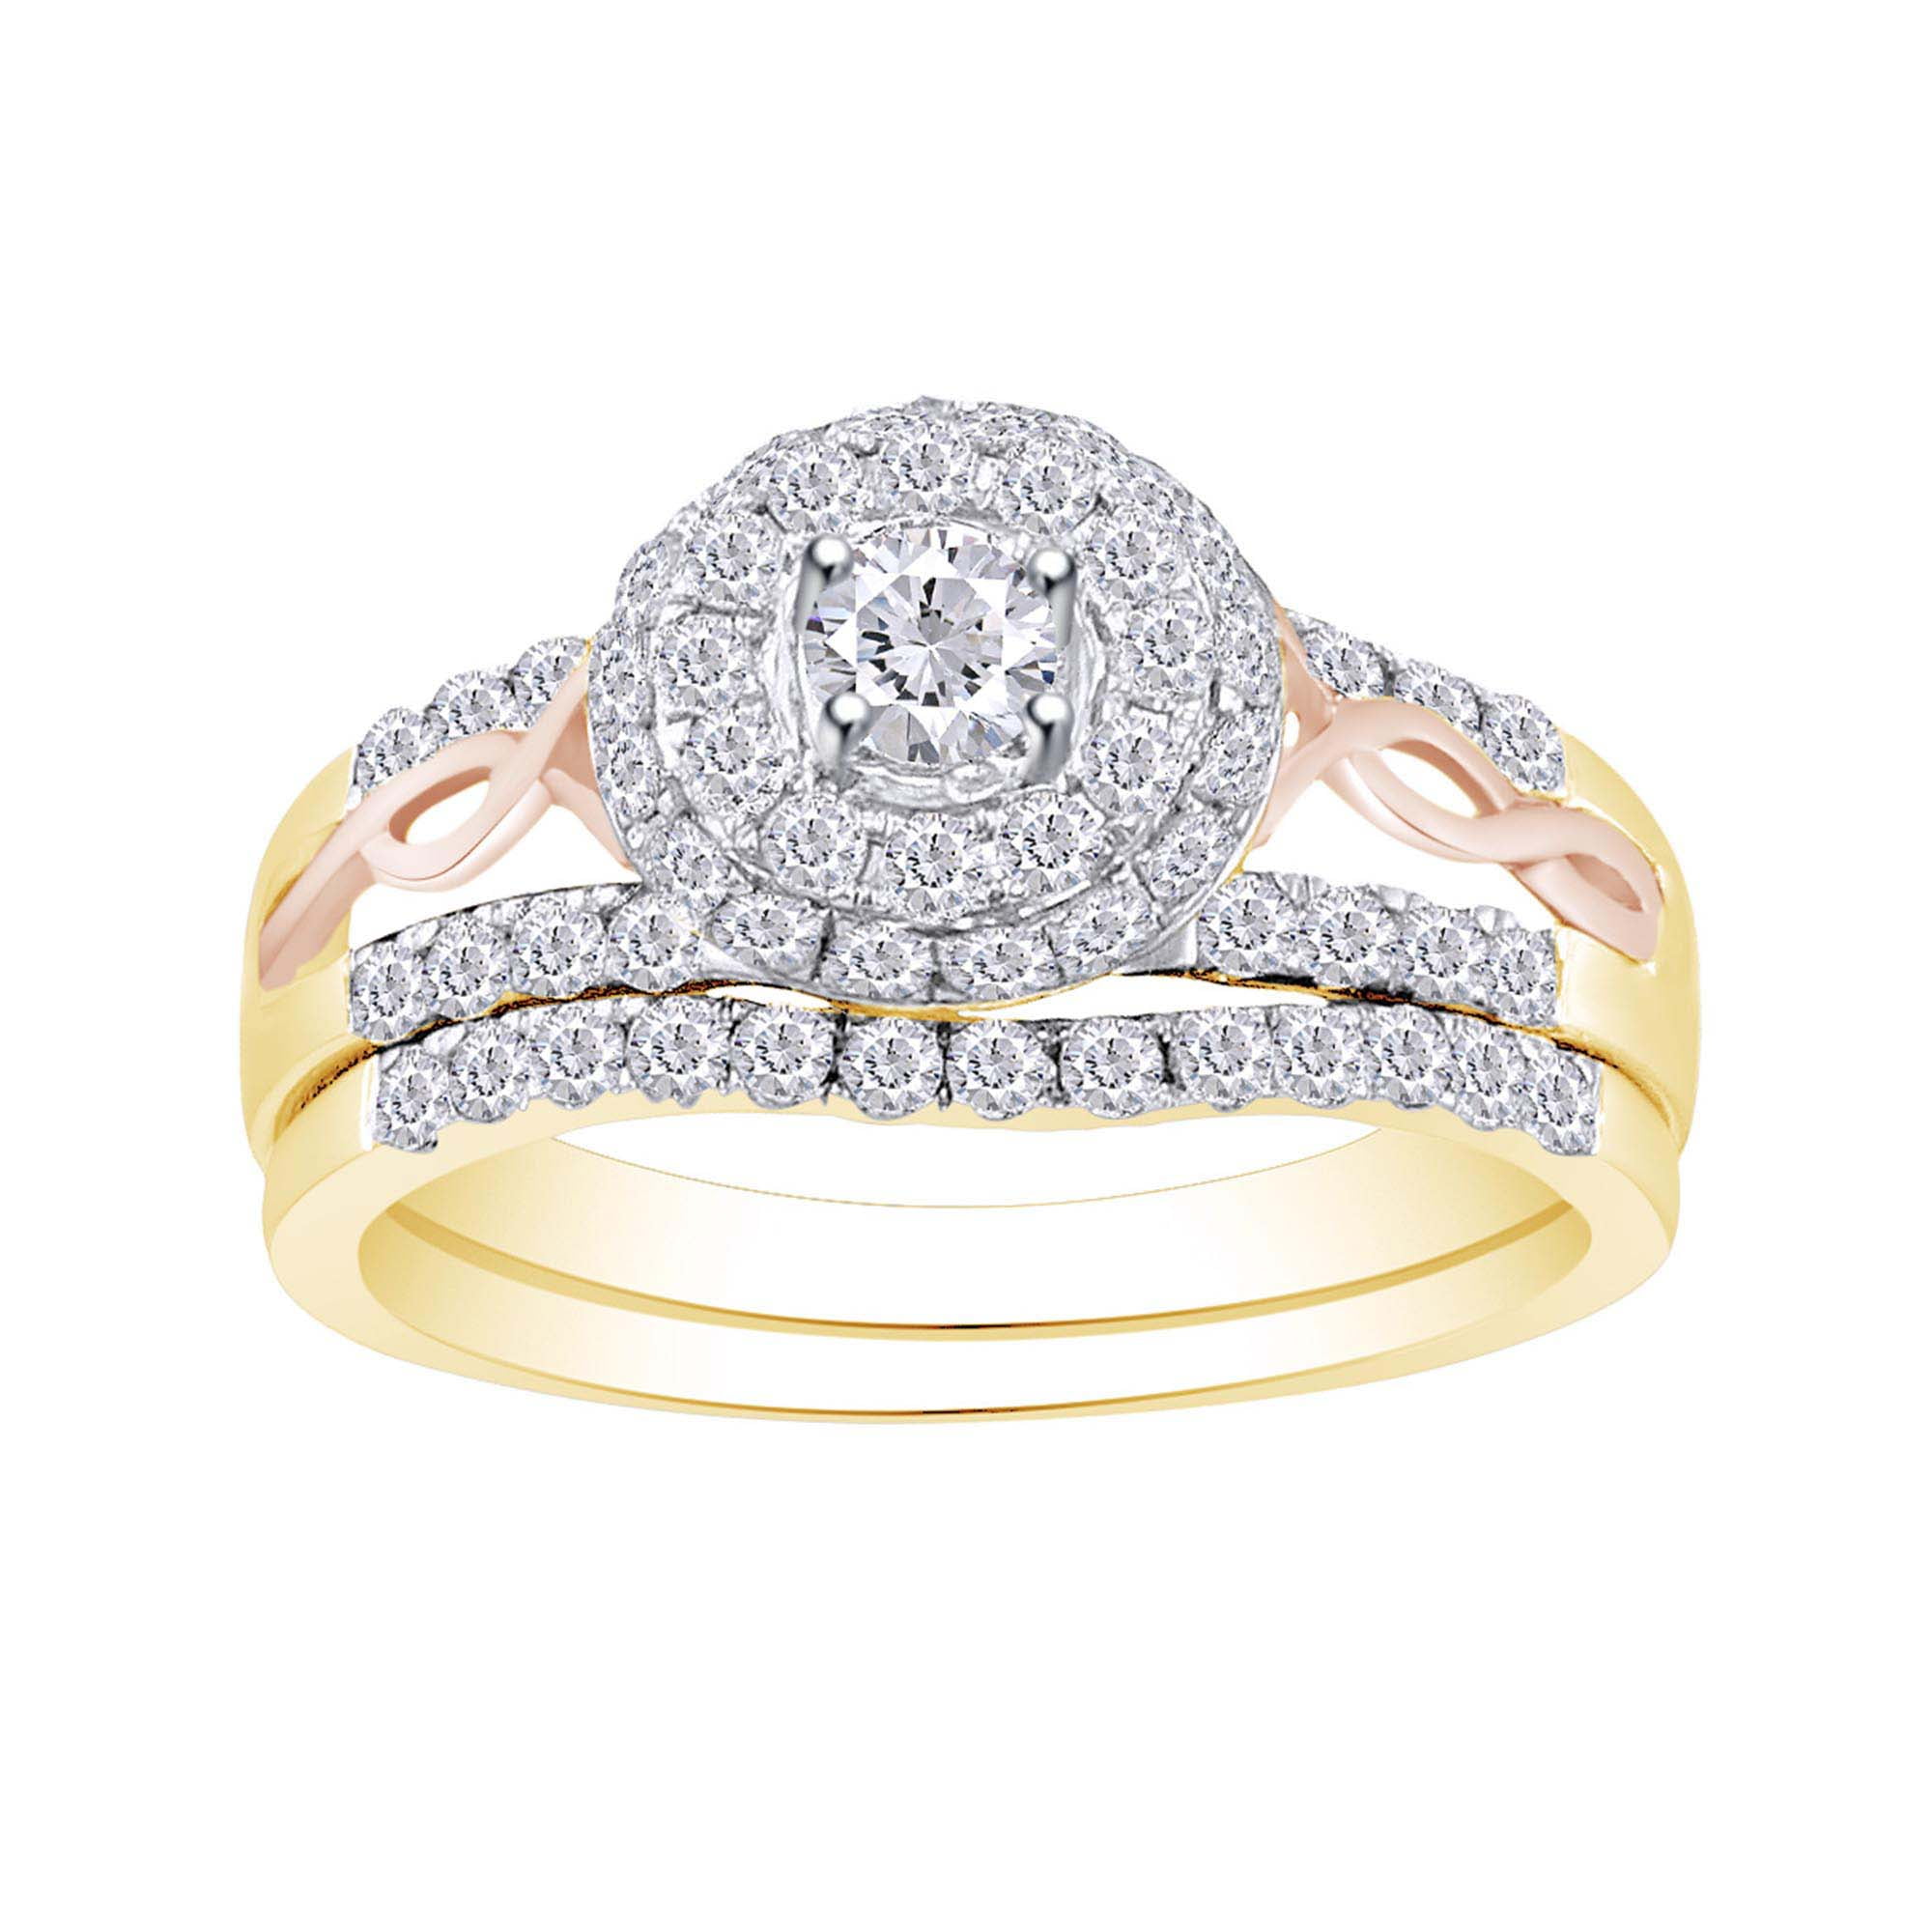 Details about   2.50 ct Pear Cut Classic Solitaire Engagement Promise Ring Solid 14k Yellow Gold 